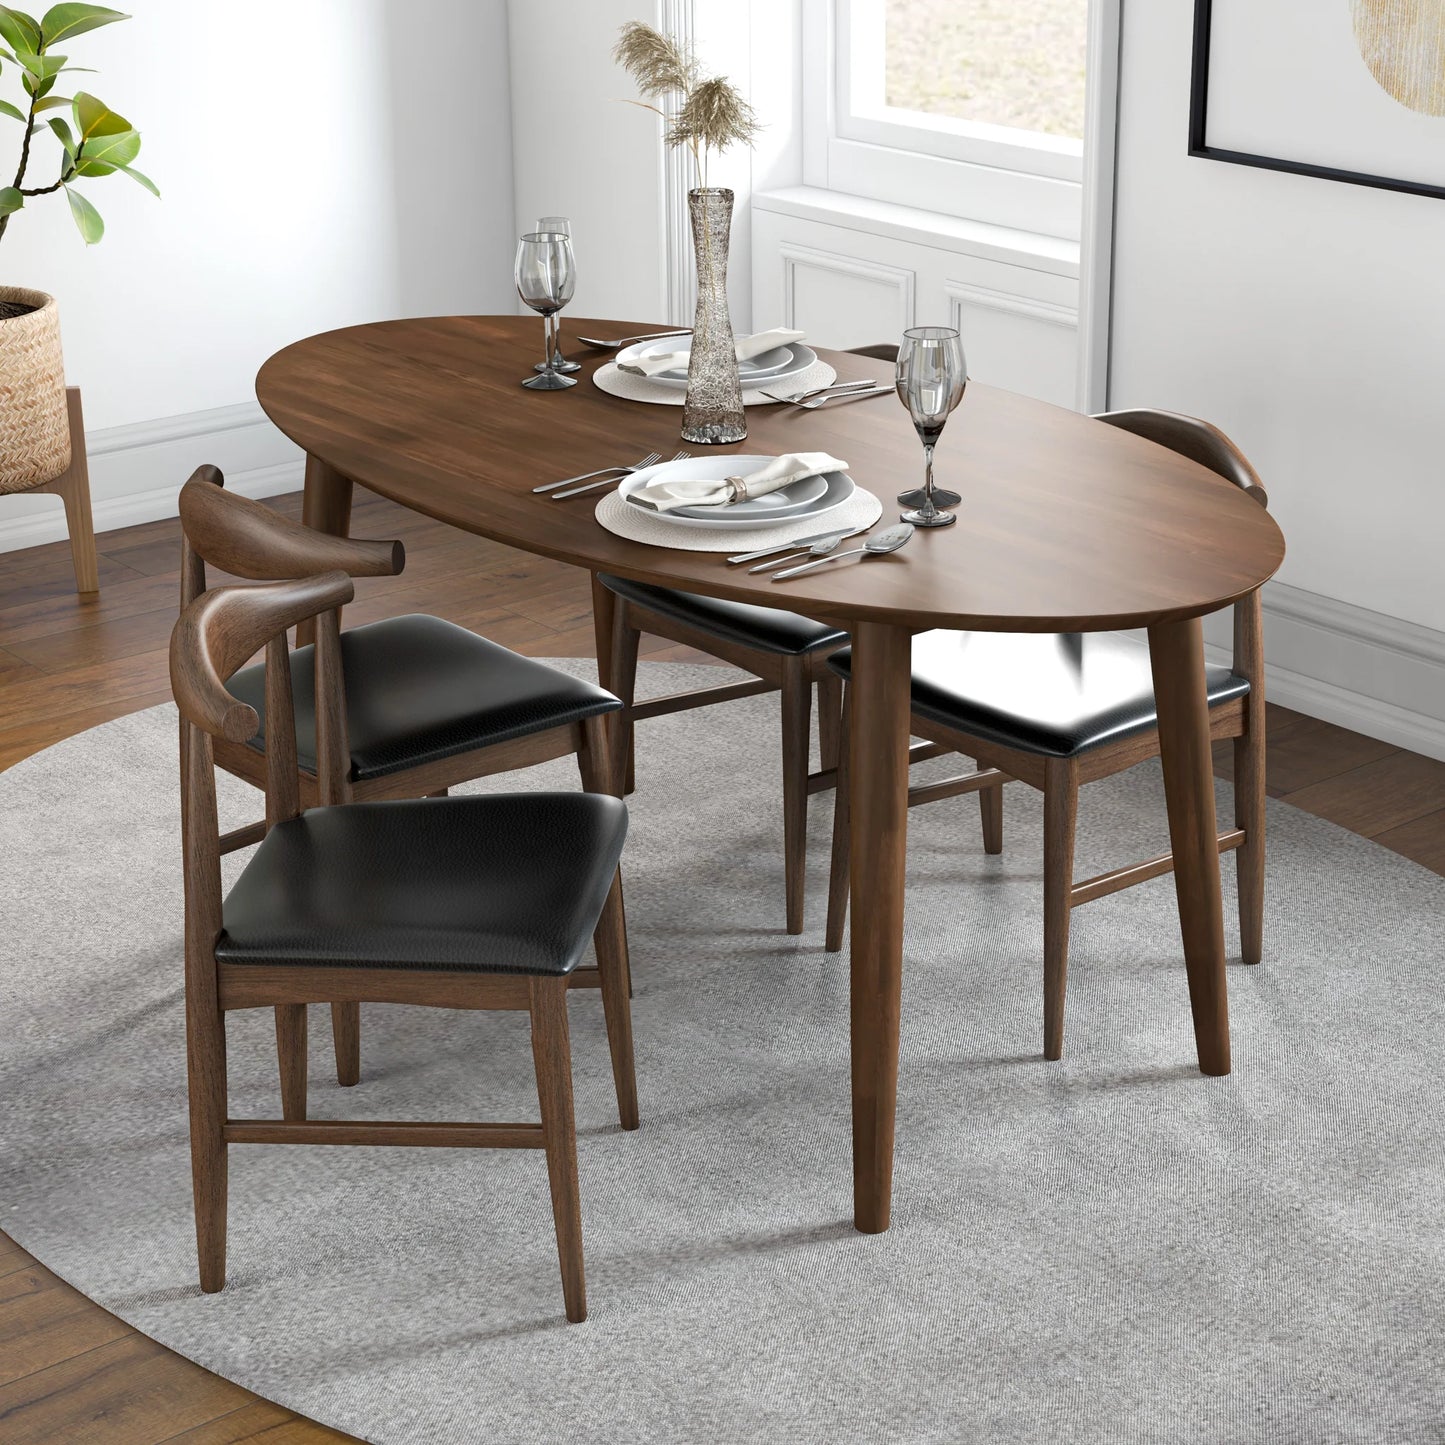 Rixos (Walnut) Oval Dining Set with 4 Winston (Black Leather) Dining Chairs